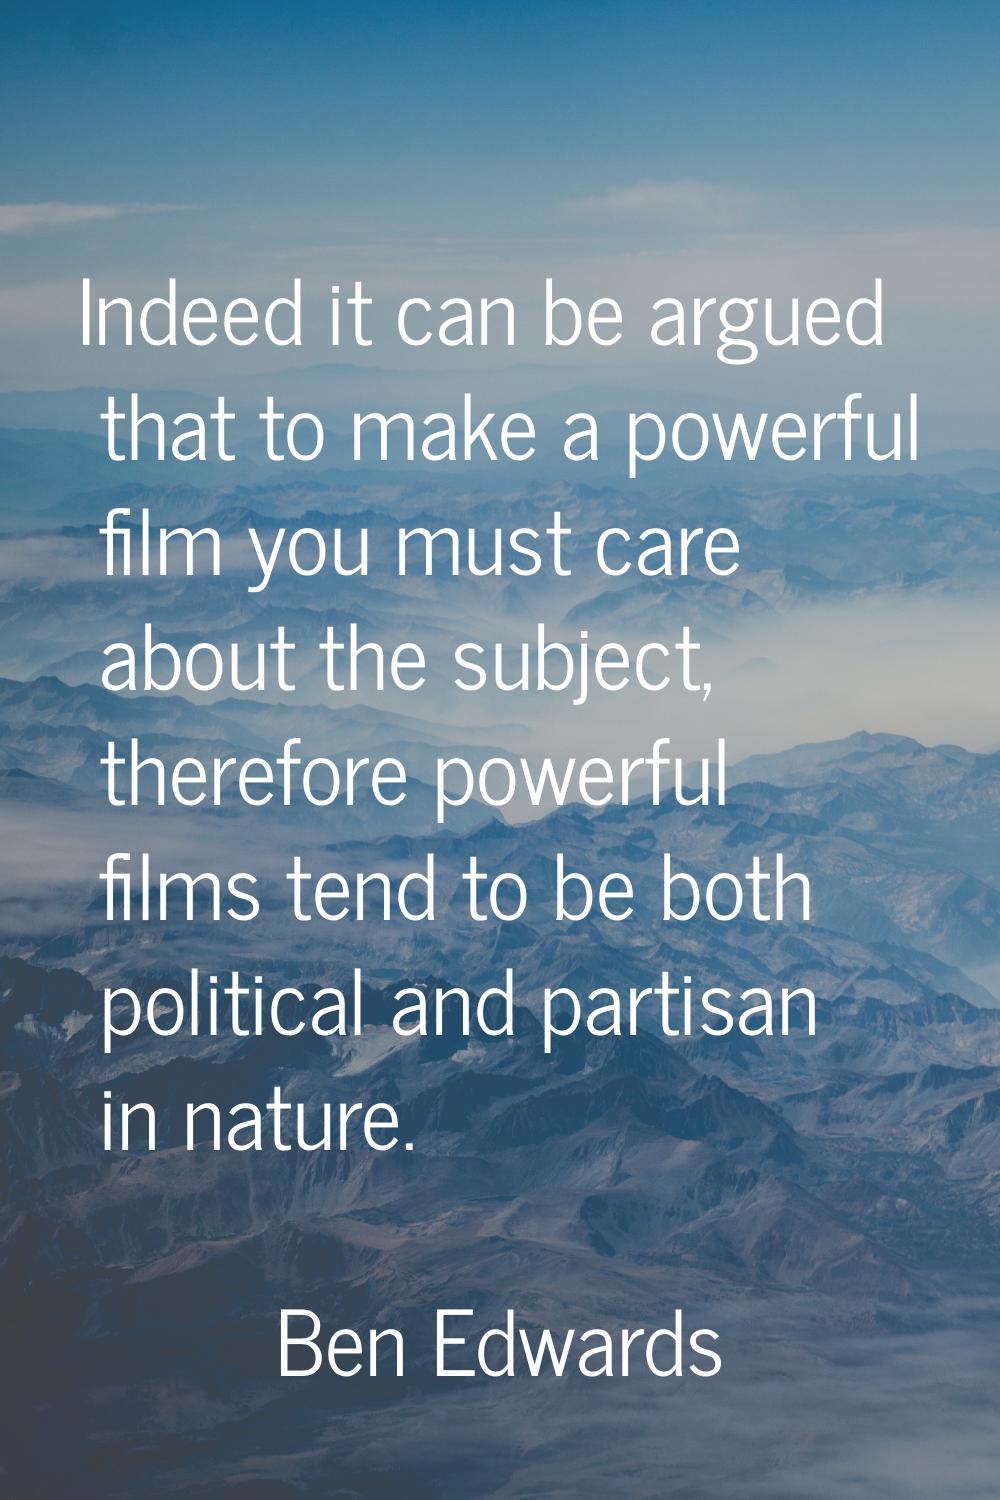 Indeed it can be argued that to make a powerful film you must care about the subject, therefore pow